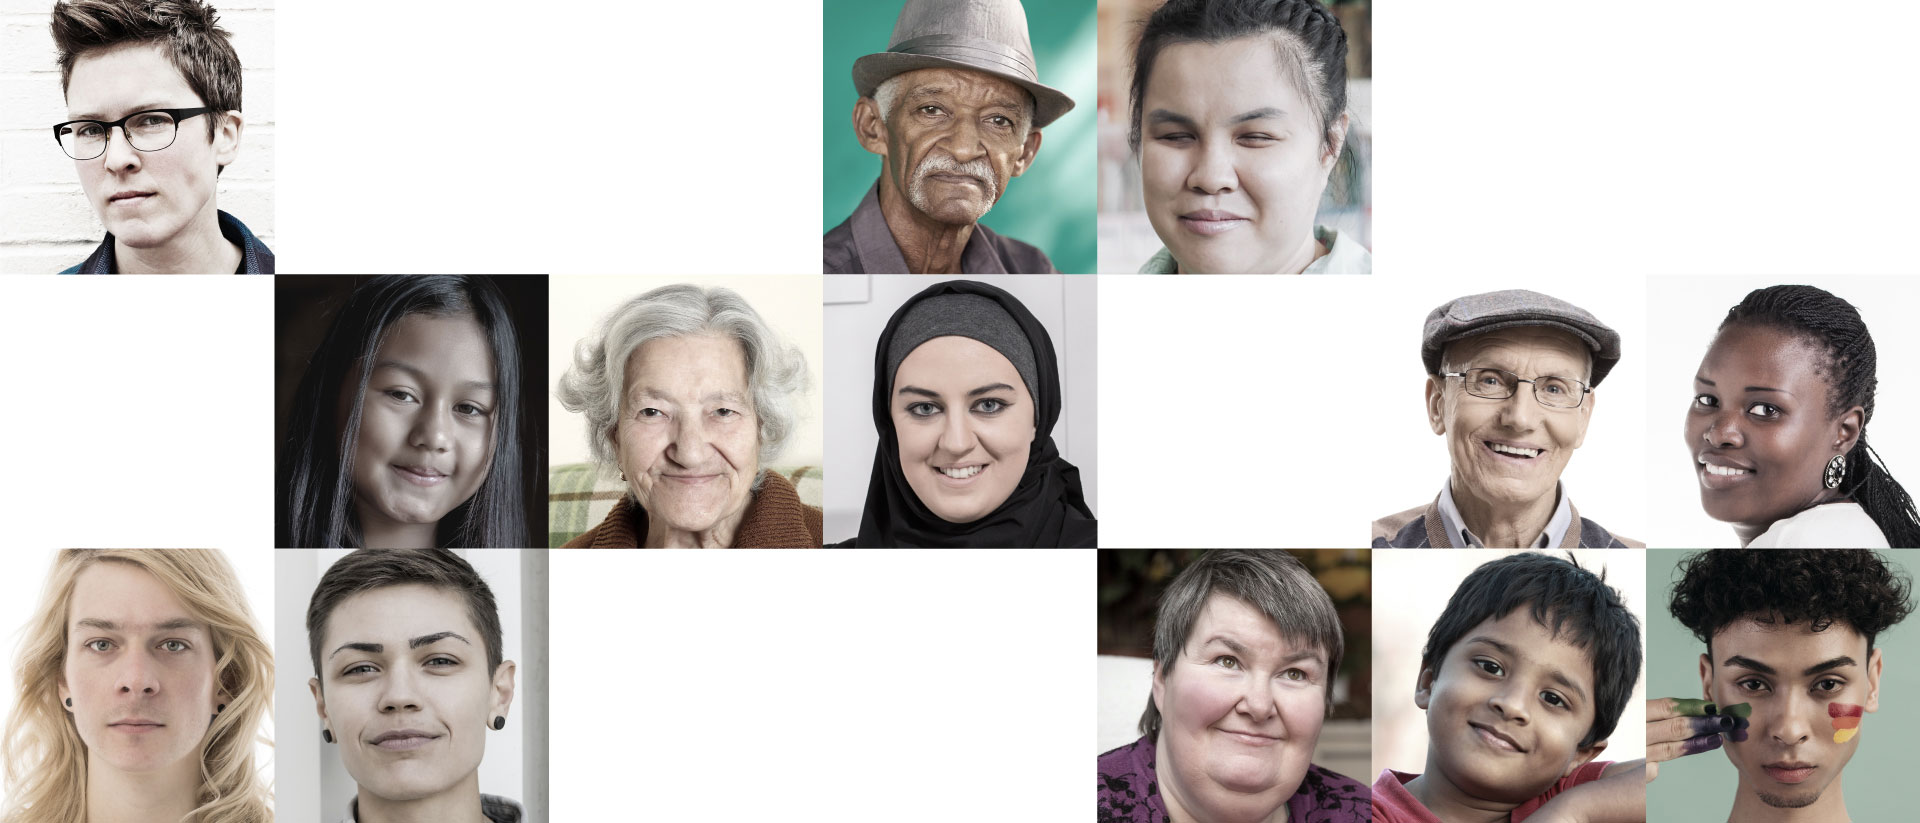 A series of close-up photos of diverse people. They show Black, brown, Latine, and white people of different genders. There are kids, adults, and elderly people; some are thin, and some are fat. Some wear glasses or hats. There is a blind woman with her eyes closed and a woman wearing a black hijab. One young brown person with an undercut, short brown curls on top, and stubble on their chin is painting rainbow-colored streaks with their fingers on their cheeks.